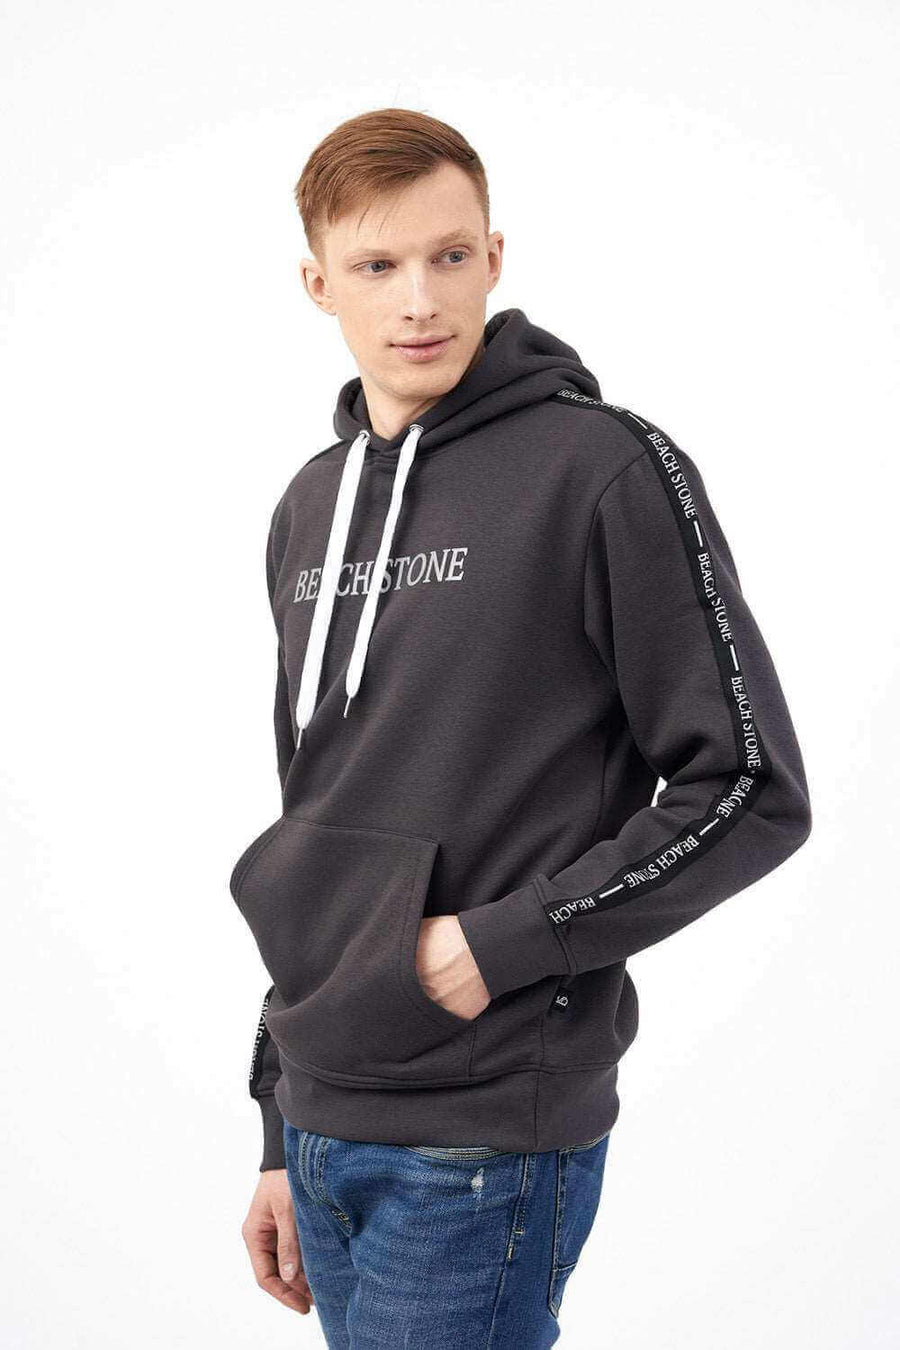 Side View of Men's Fleece Hoodie with Side Tape at Sleeves 